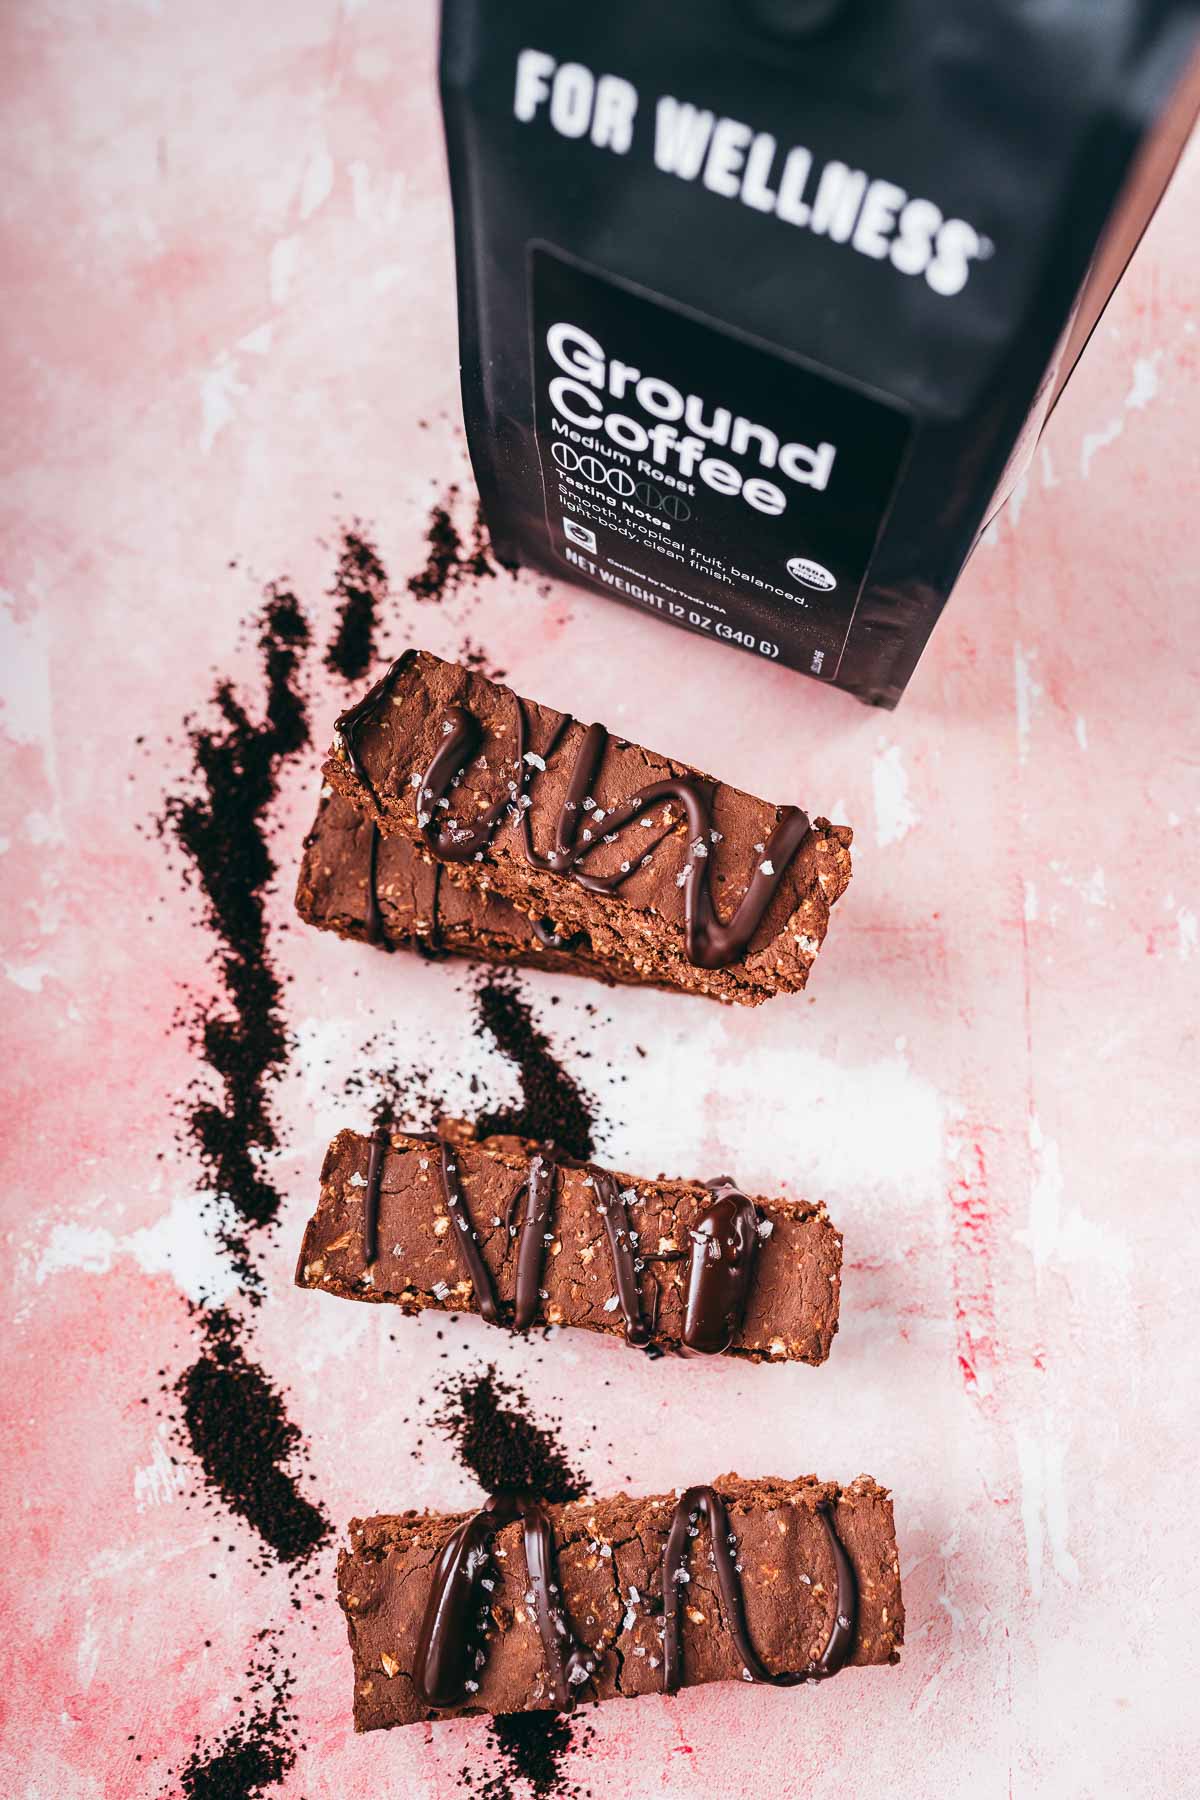 A stack of chocolate protein bars resting on a pink table next to a black bag of ground coffee.